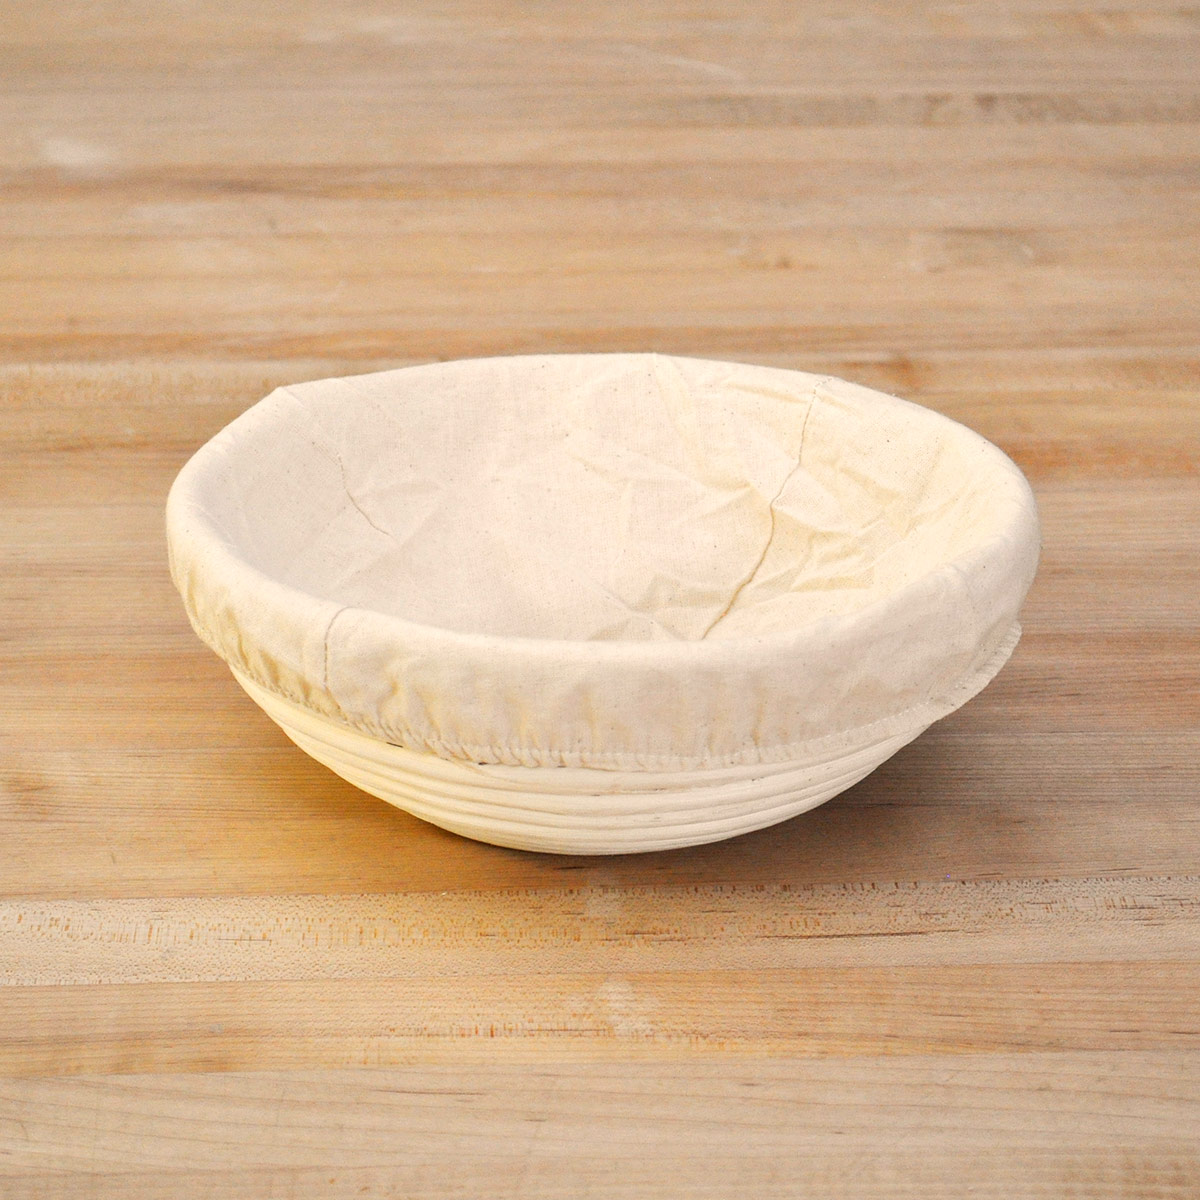  Bread Proofing Baskets - Silicone / Bread Proofing